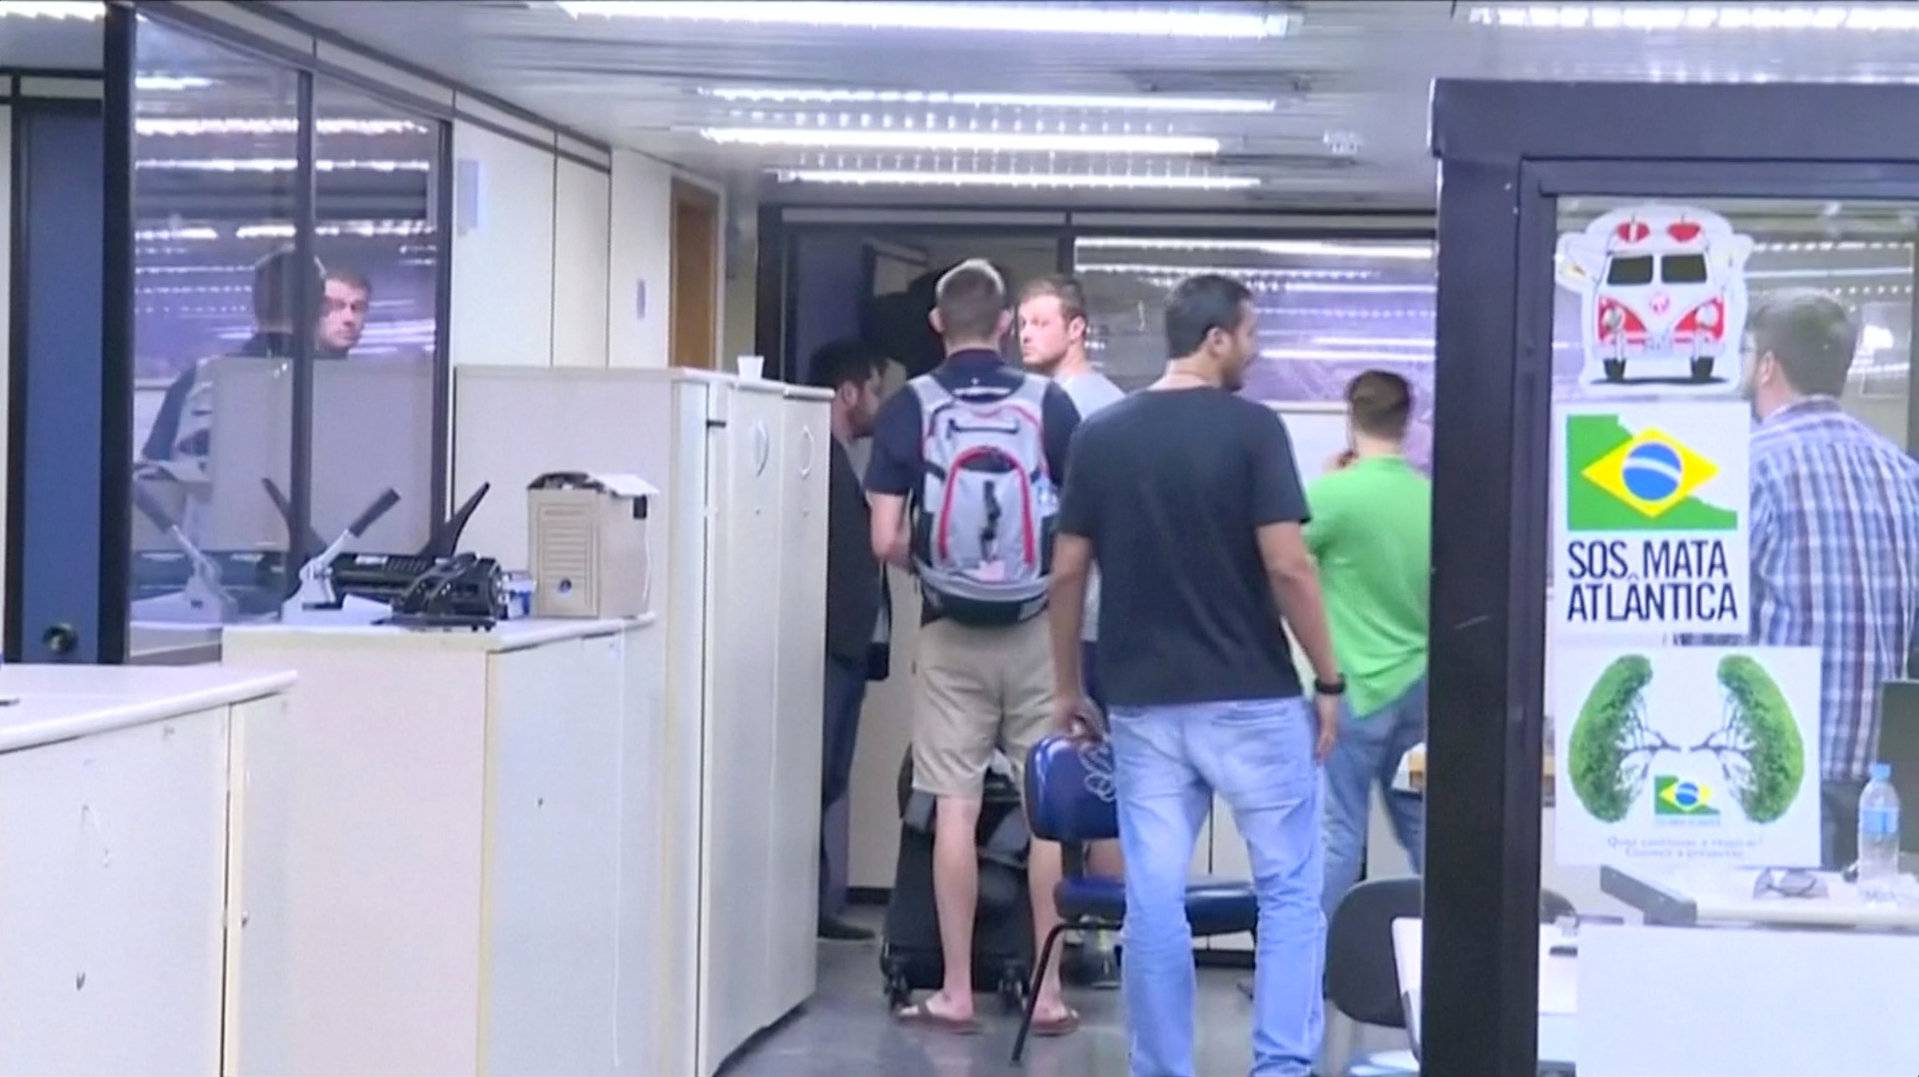 U.S. Olympic swimmers Gunnar Bentz and Jack Conger walk inside the airport police station office at Rio's international airport in this still frame taken from video 